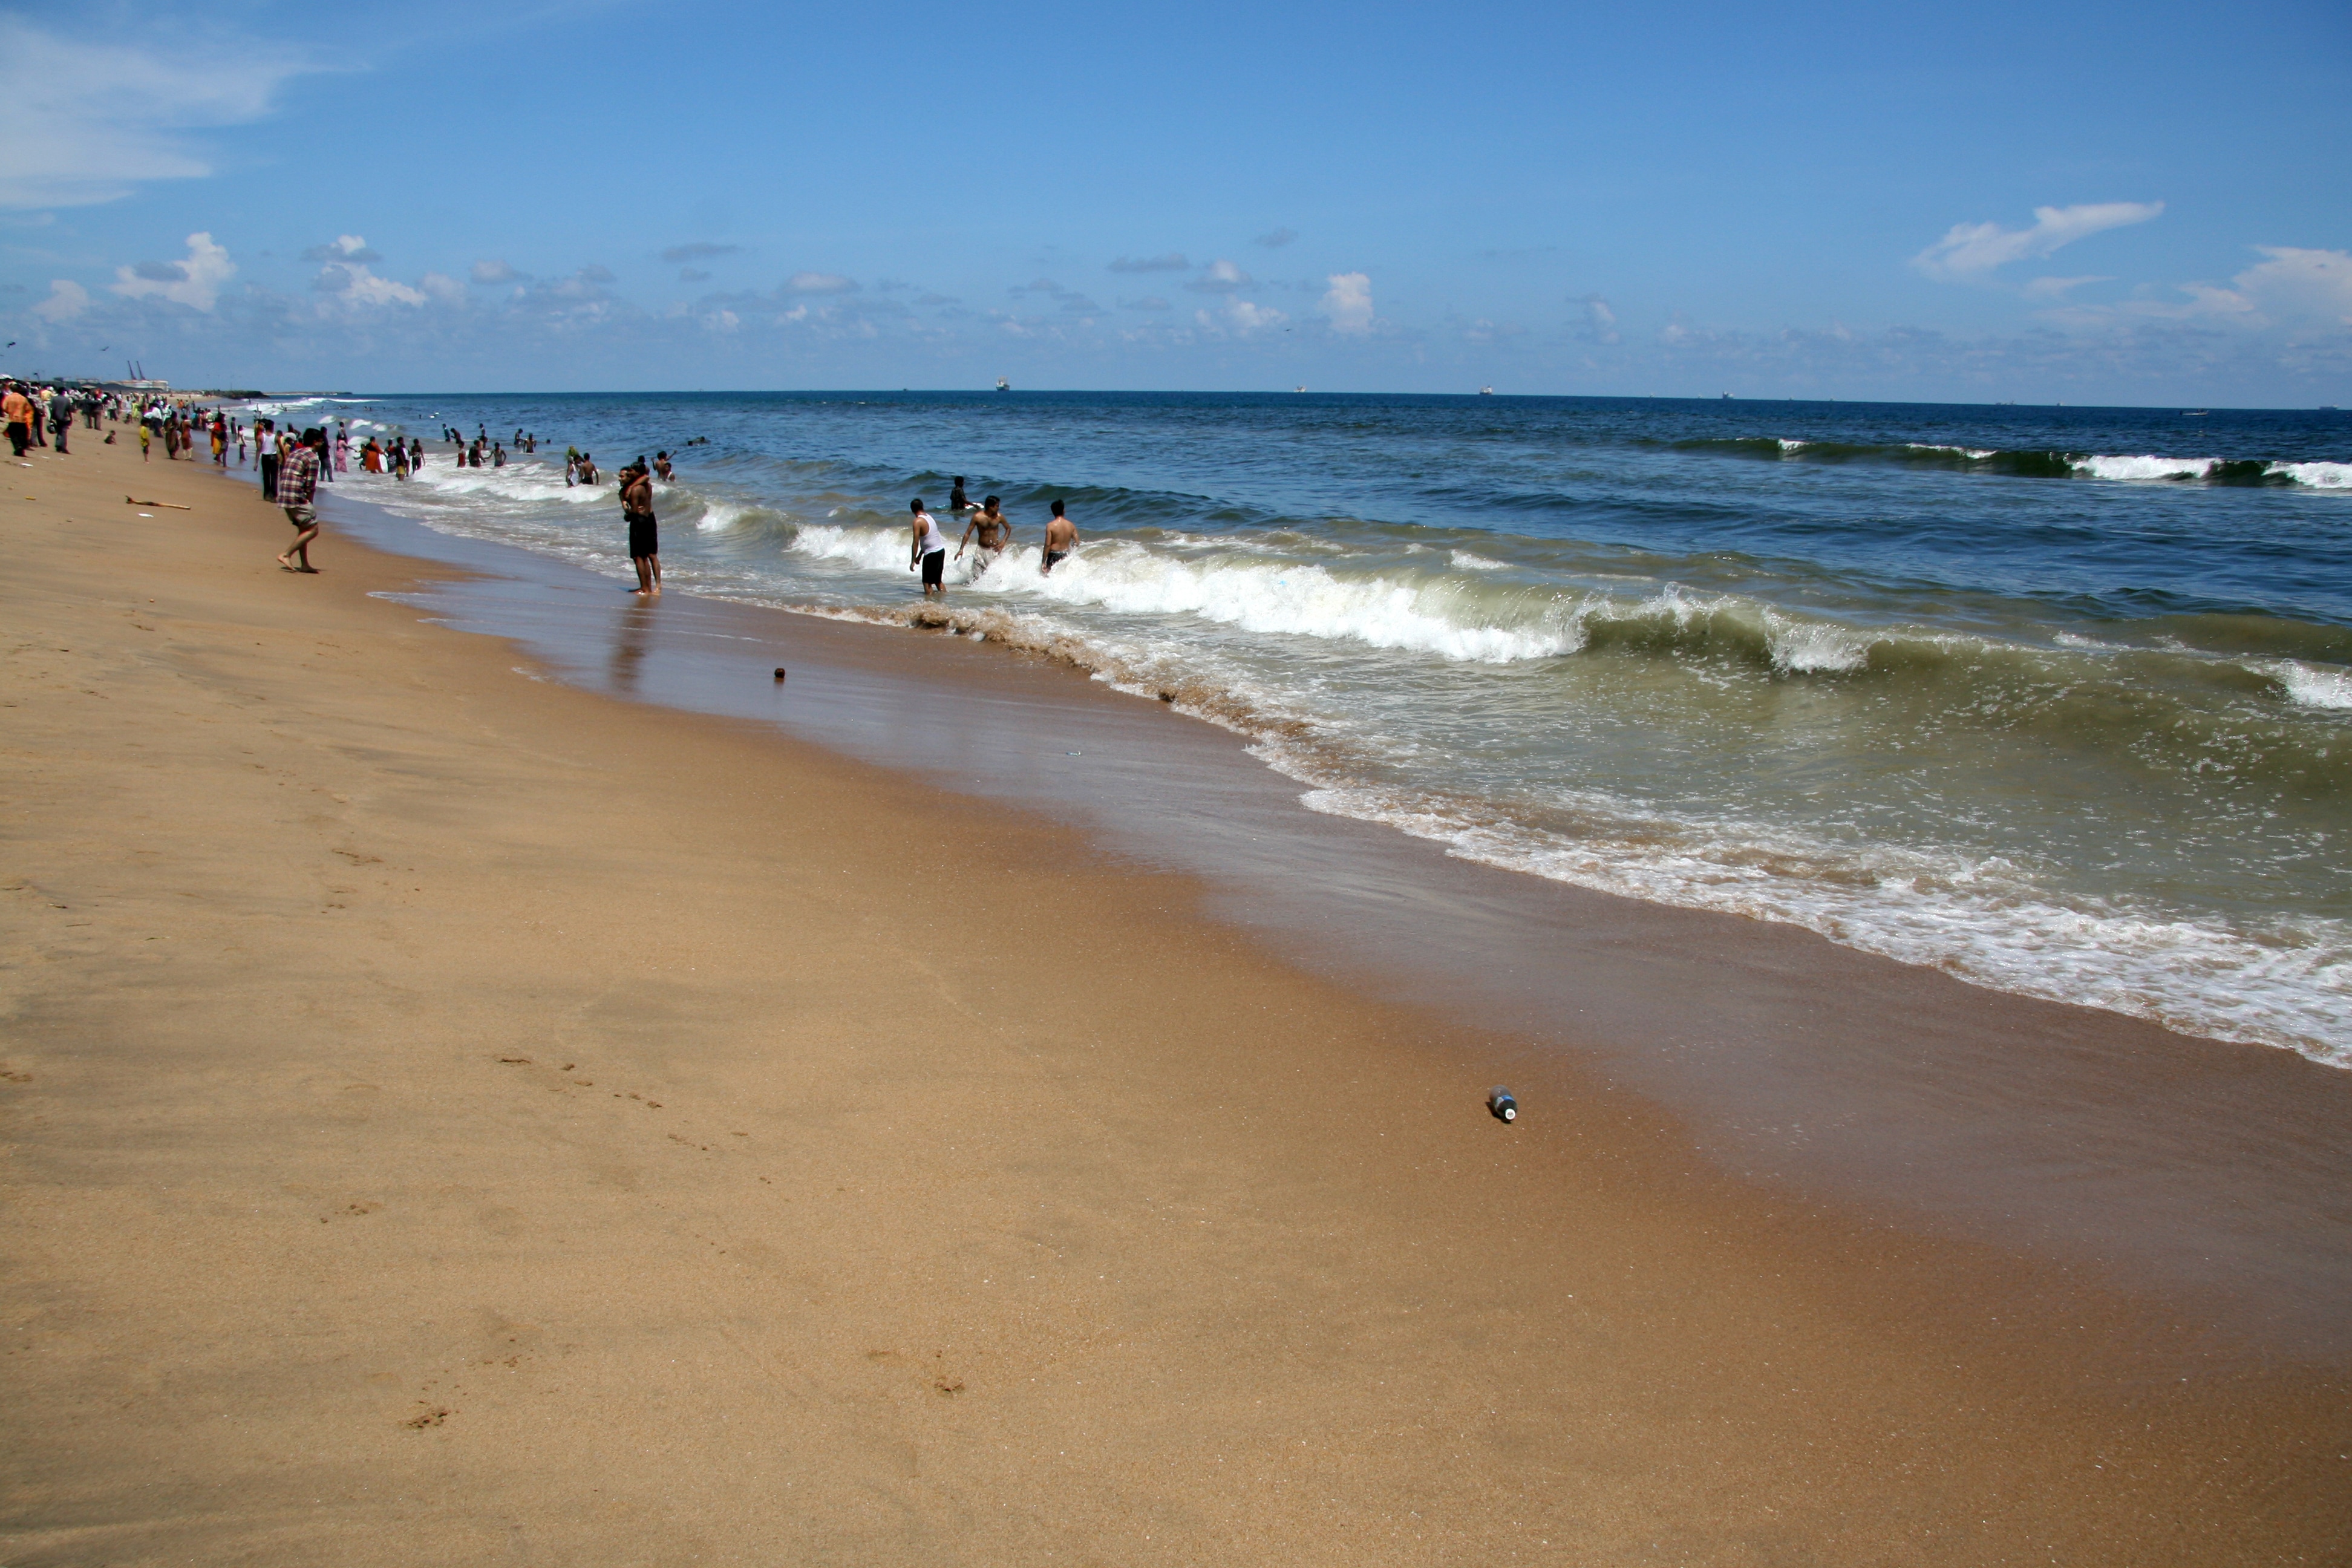 in which indian state can you visit marina beach